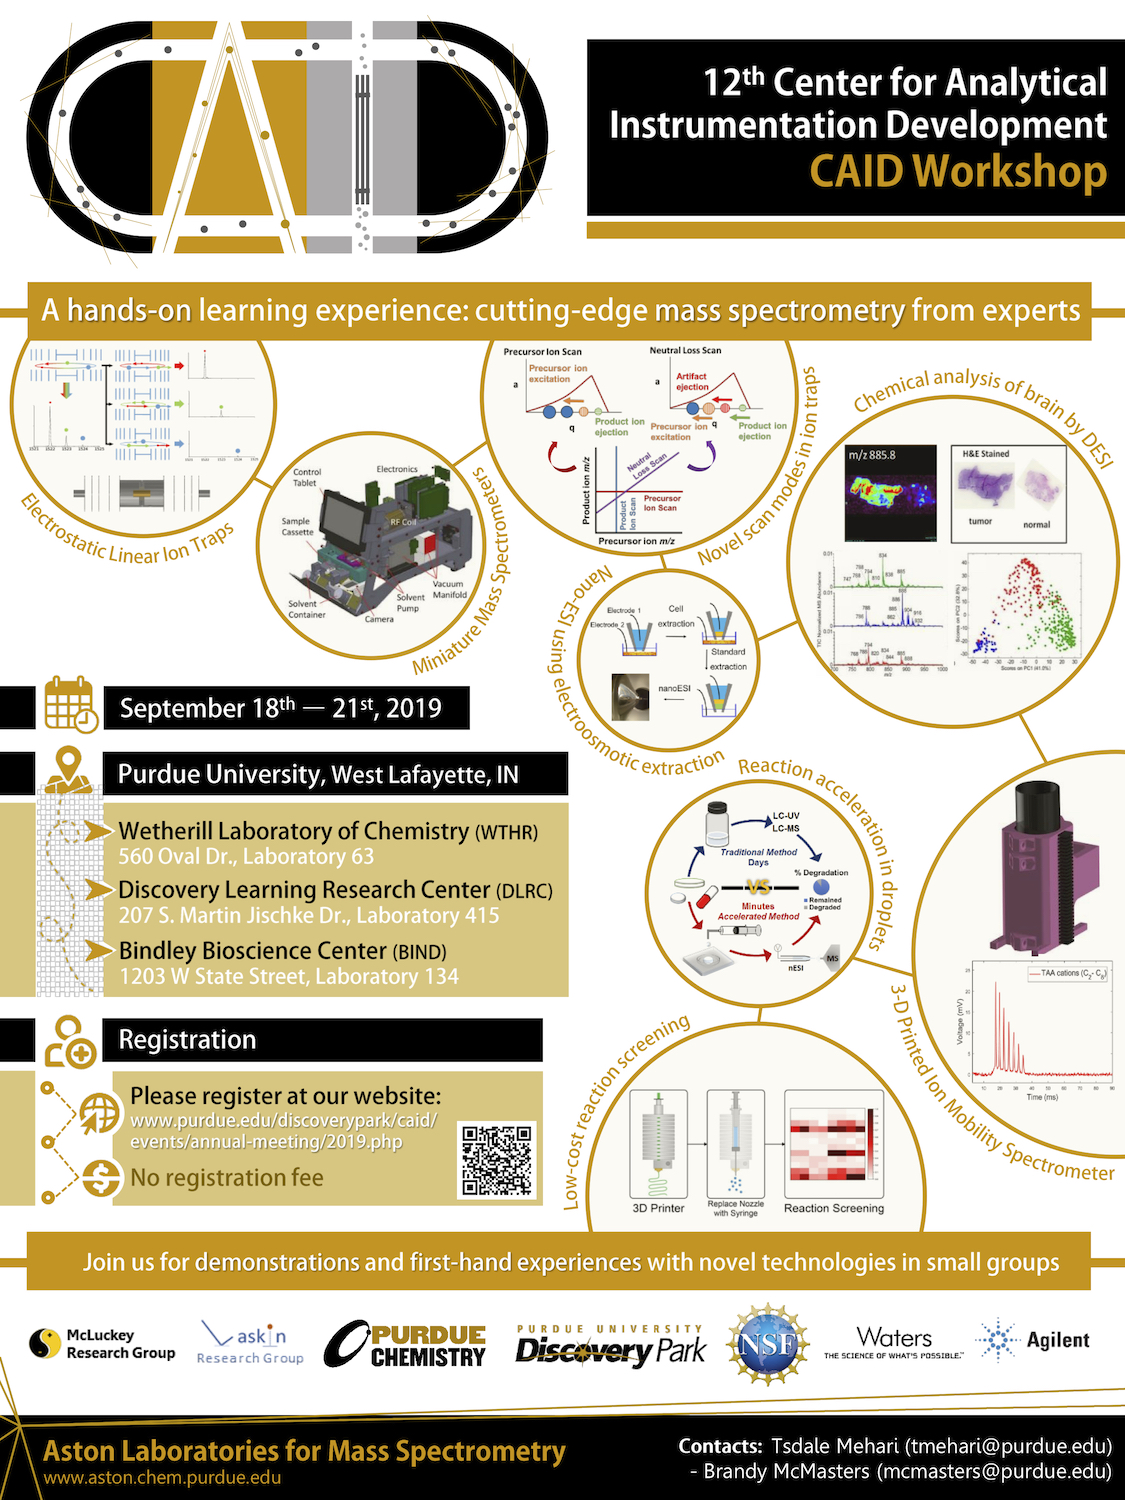 Purdue University. Center for Analytical Instrumentation Development. Learn About Mass Spectrometry From Experts! Where: Purdue University, West Lafayette IN, 47907. When: September 18th-21st 2019. What: Lab demonstrations. Who: Everyone is welcome!